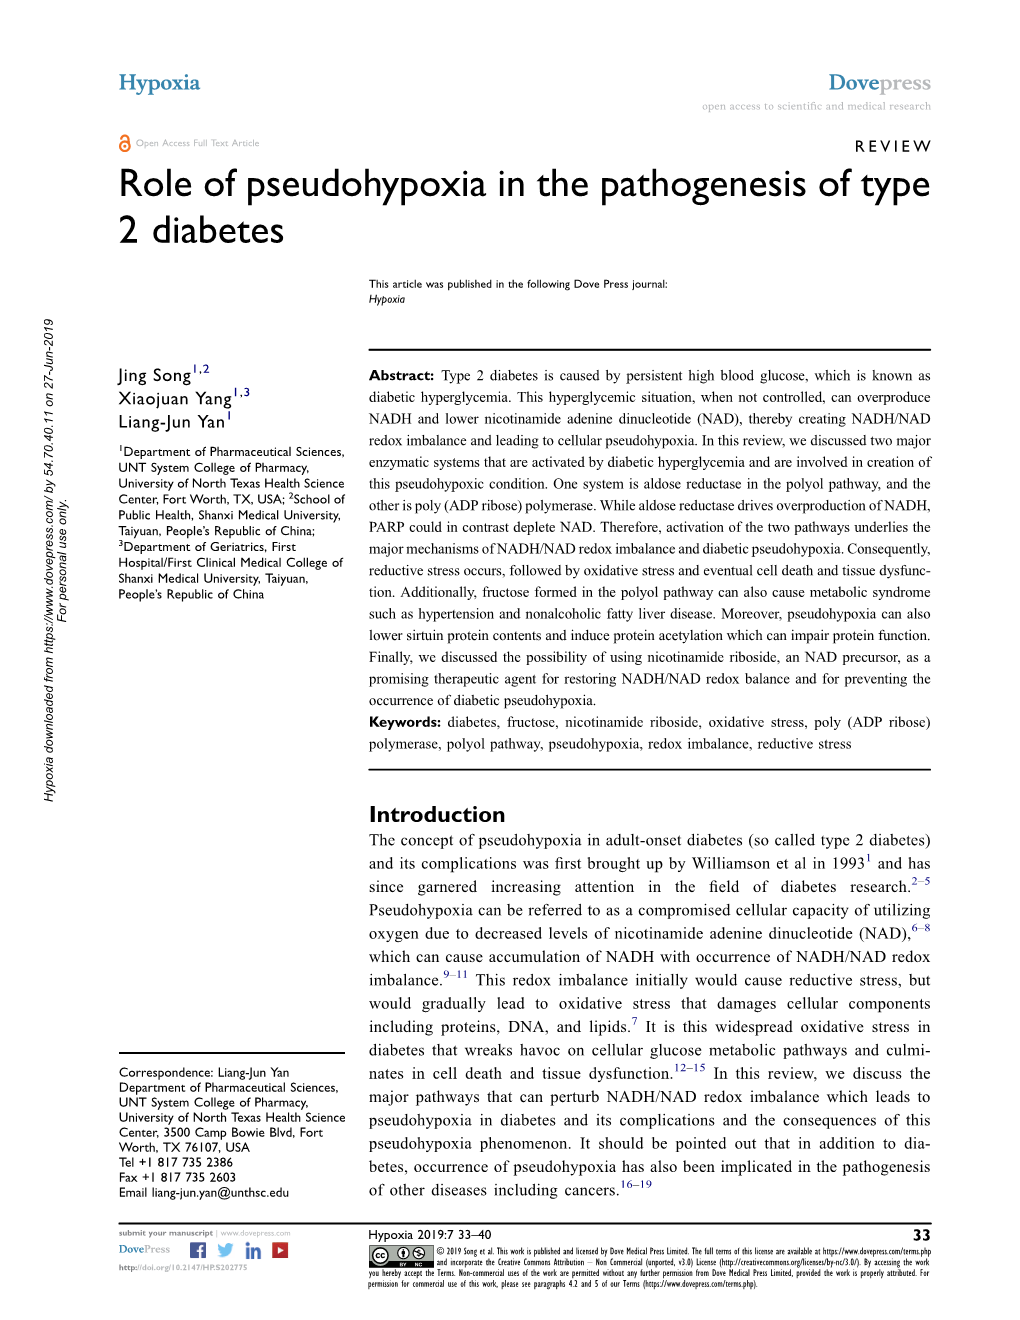 Role of Pseudohypoxia in the Pathogenesis of Type 2 Diabetes